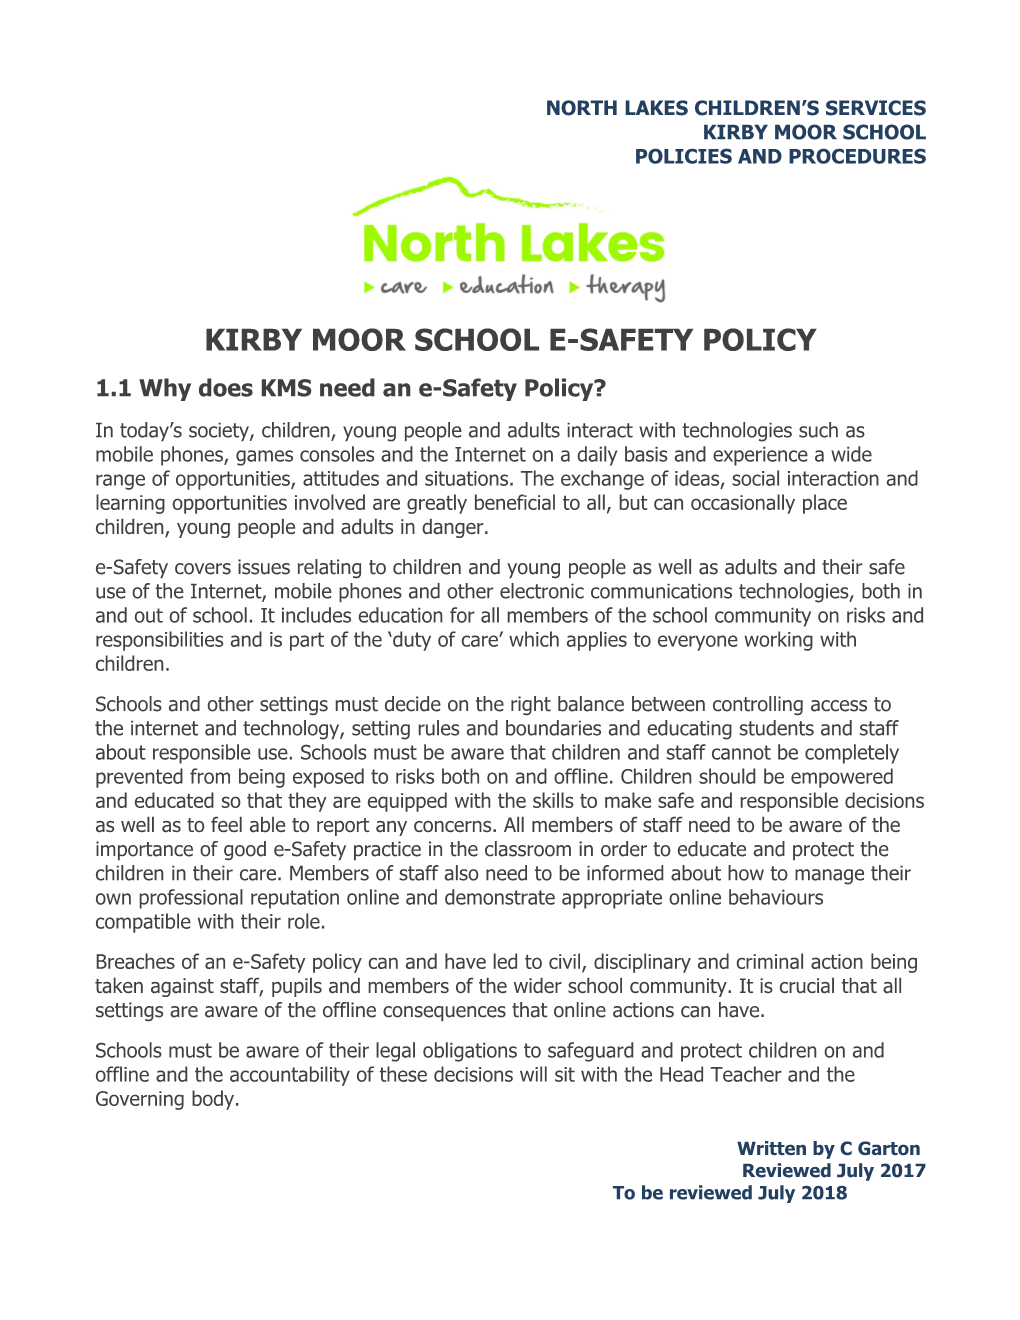 Schools and Settings E Safety Policy Template 2012